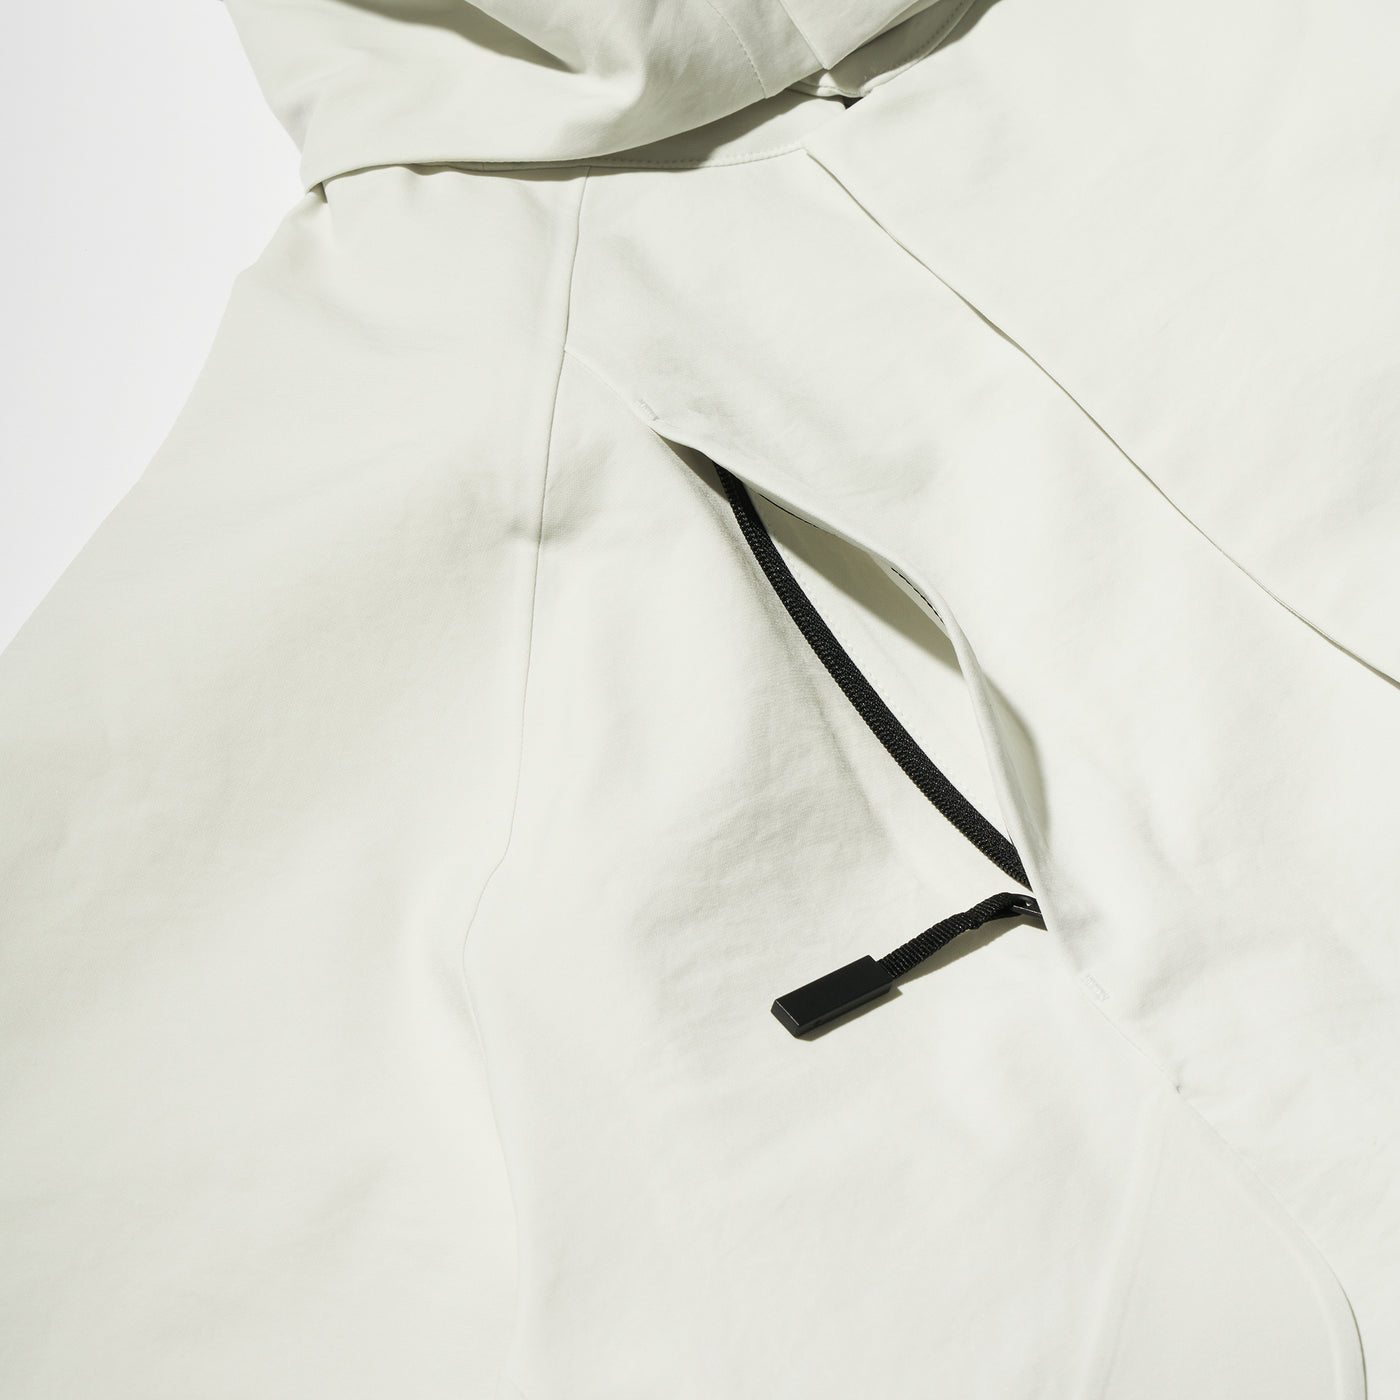 Double Cloth Hooded Coach Jacket